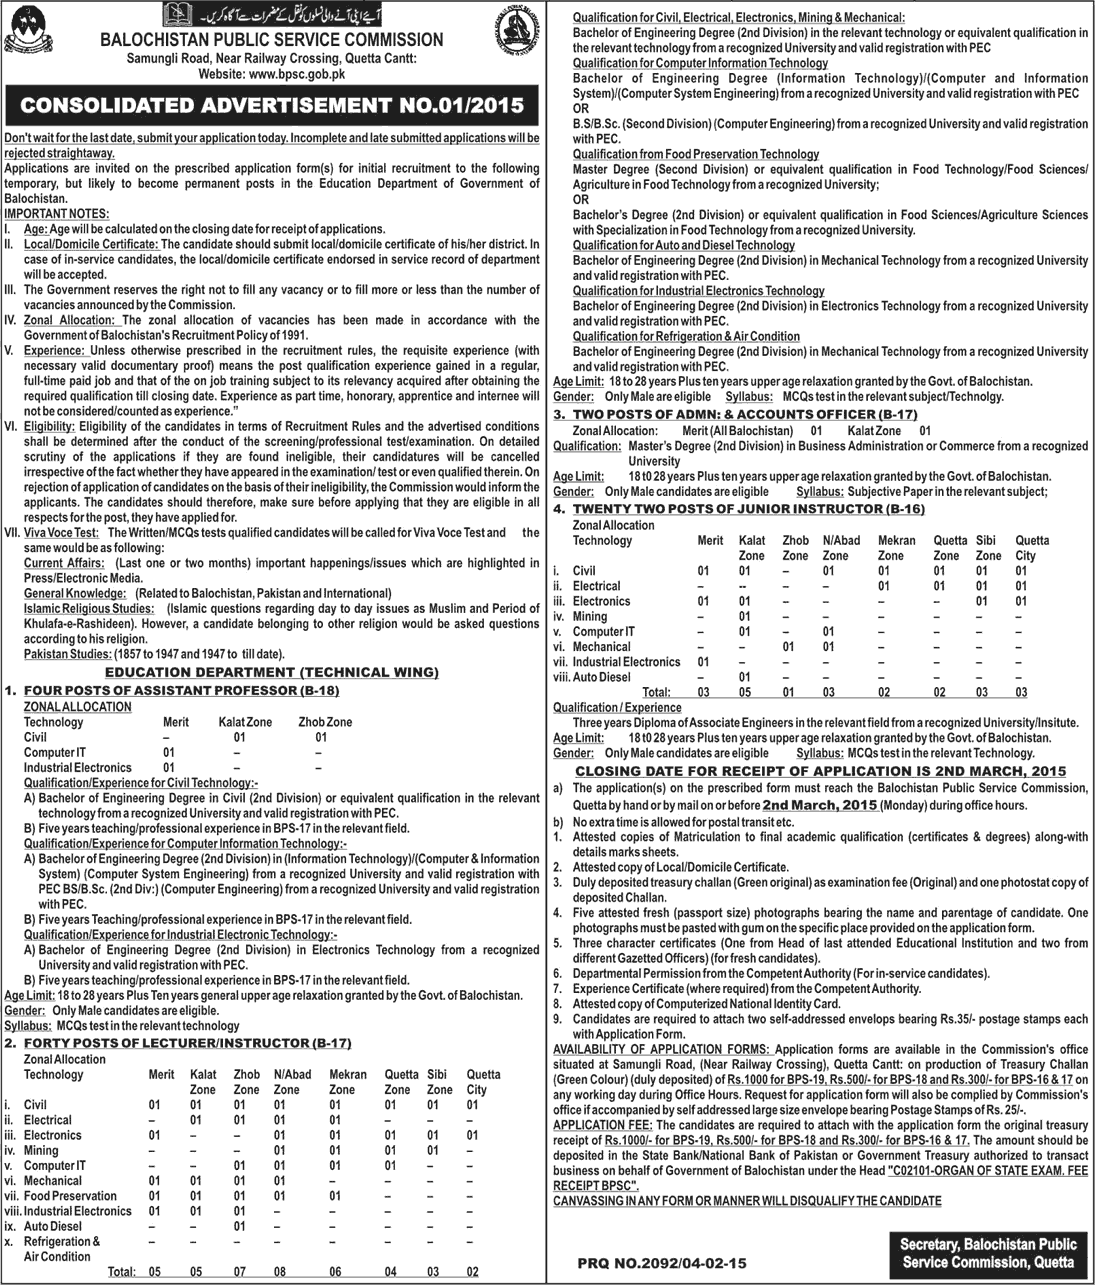 BPSC Jobs 2015 February Consolidated Advertisement 01/2015 (1) Latest / New